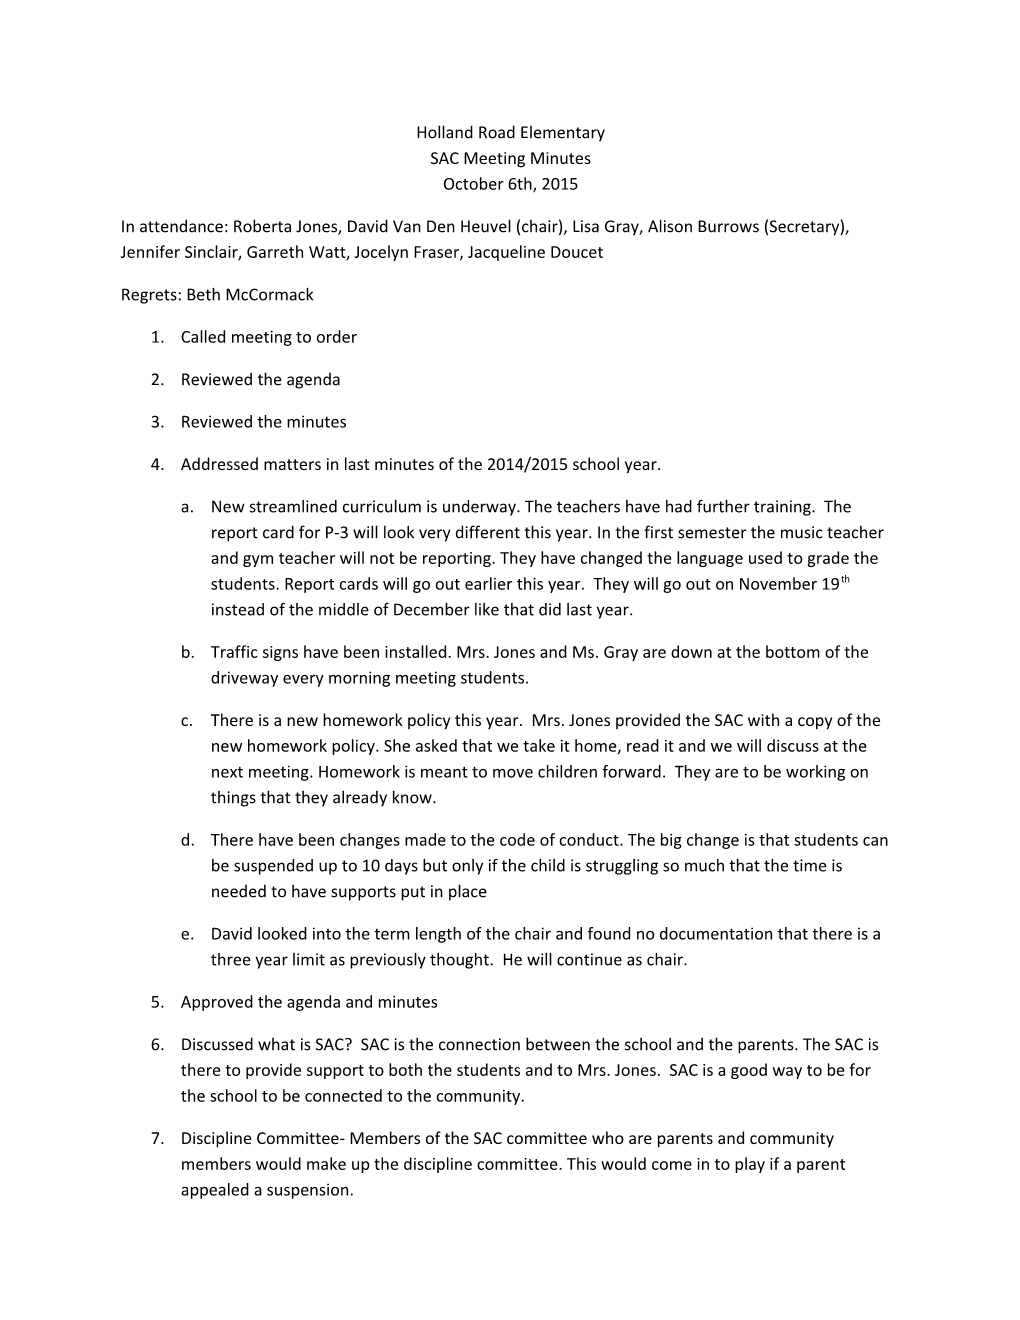 Holland Road Elementary SAC Meeting Minutes October 6Th, 2015